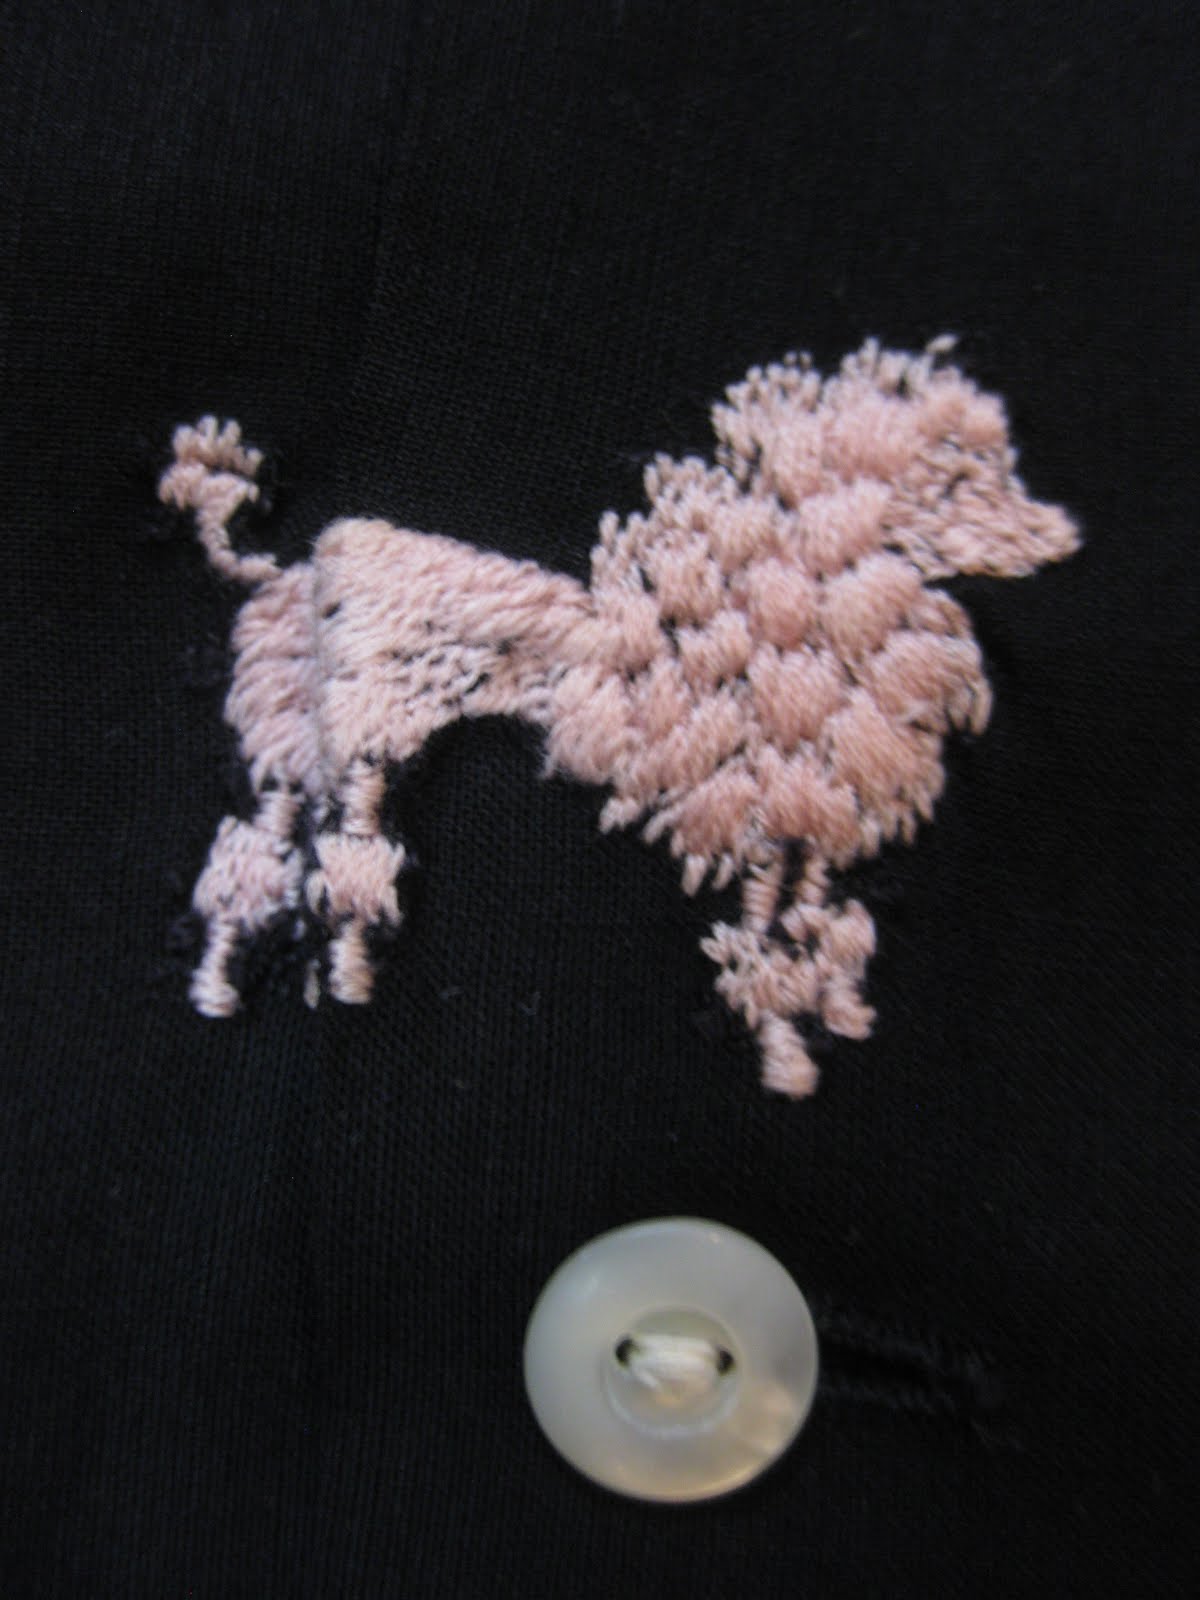 50's      　　　　　　　　　　　　　　　BLACK RAYON SHIRTS　　　　　　　　　　　　　with PINK POODLES EMBROIDERY